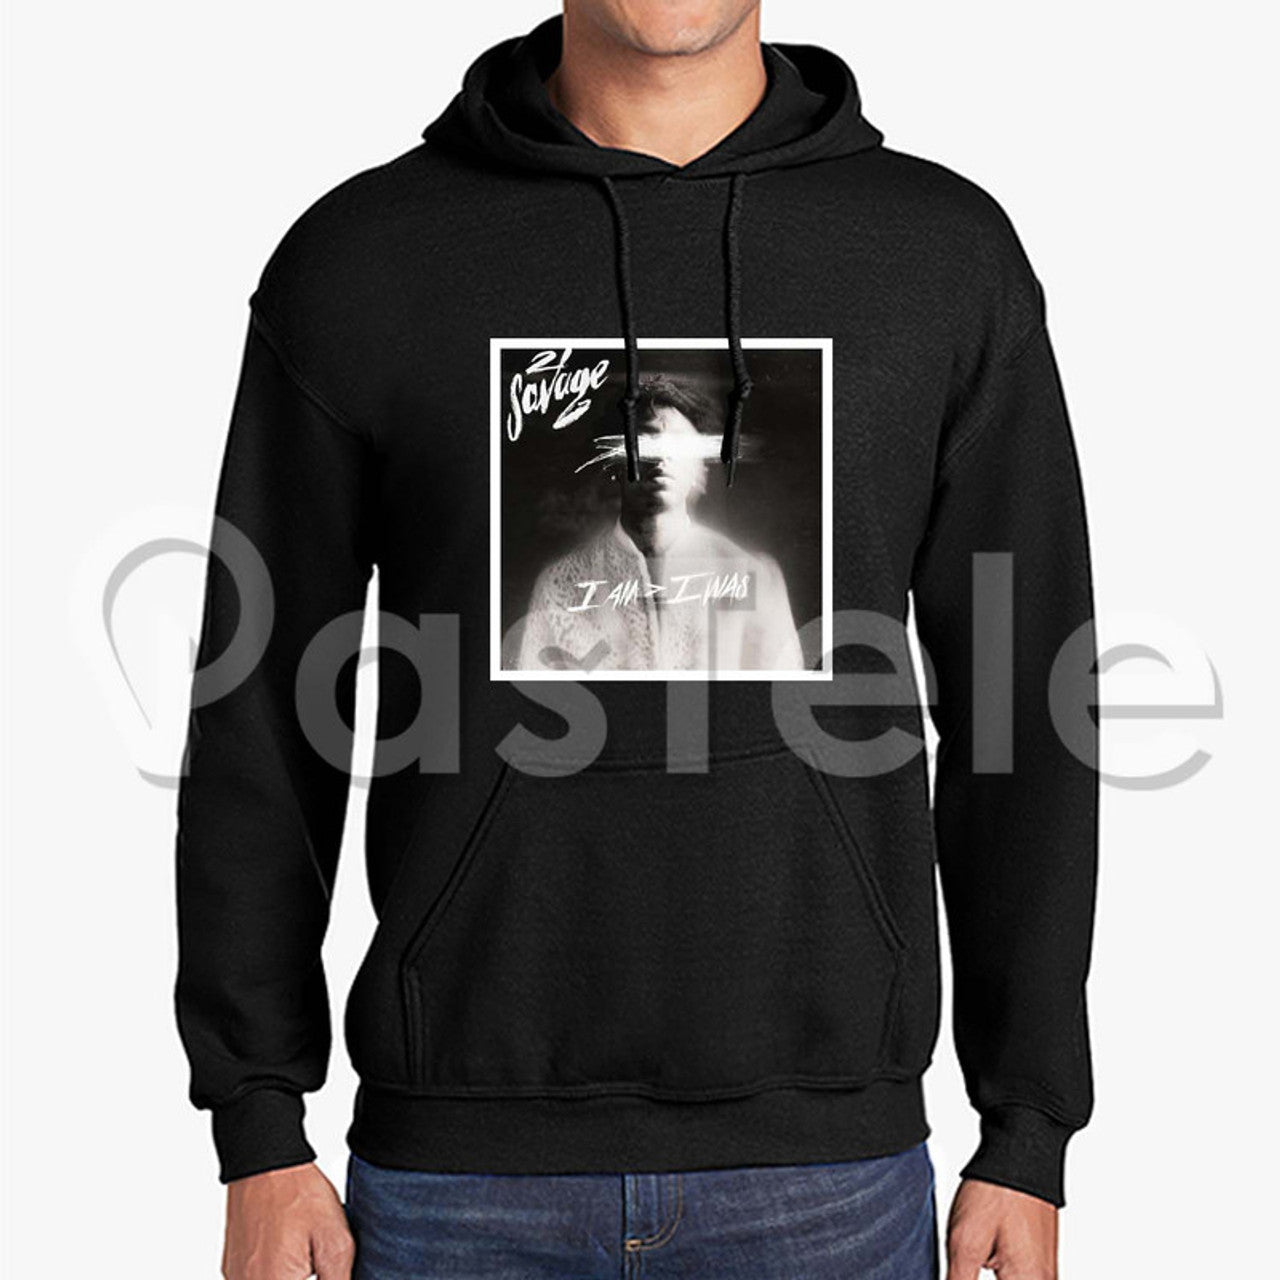 Stay Stylish With The 'I Am I Was' Hoodie: Comfort And Fashion Combined